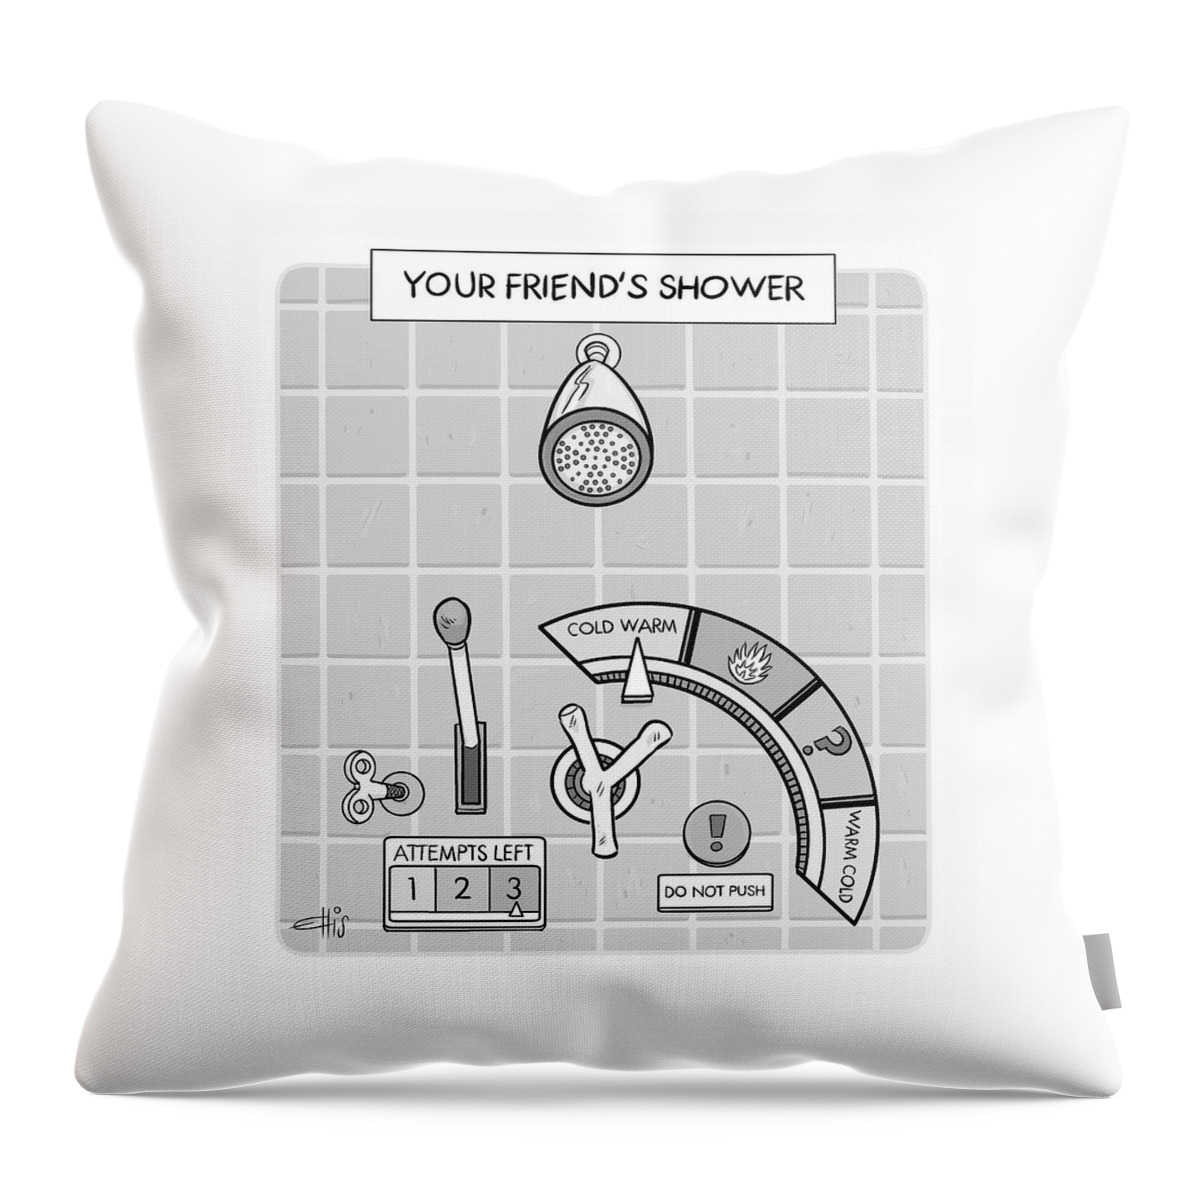 Your Friend's Shower Throw Pillow